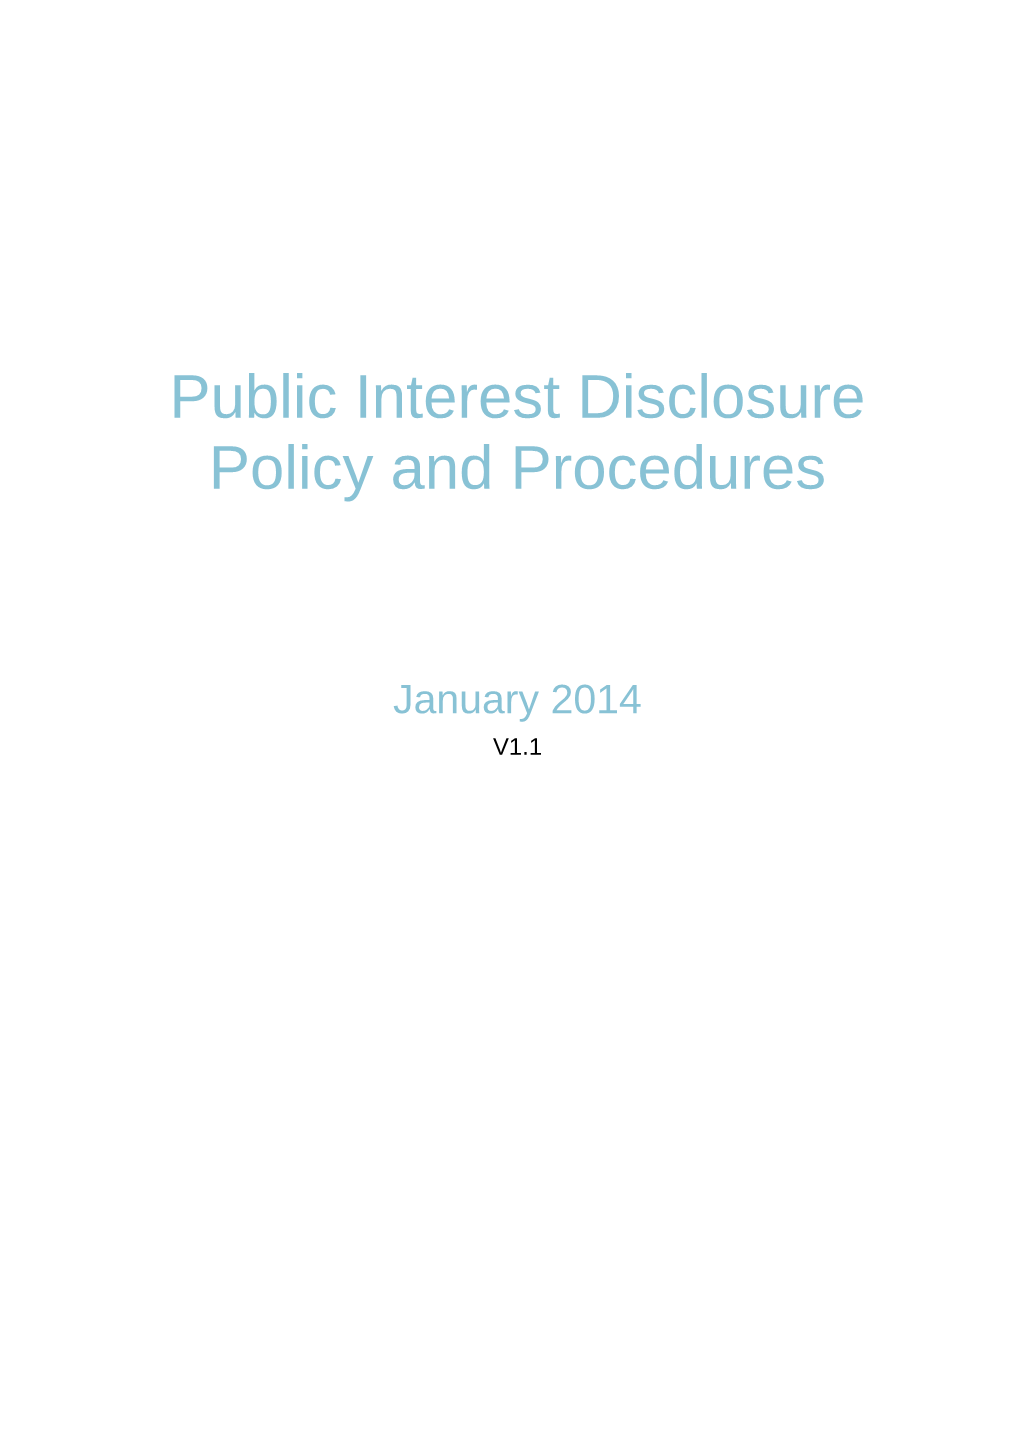 Commission Public Interest Disclosure Policy and Procedures